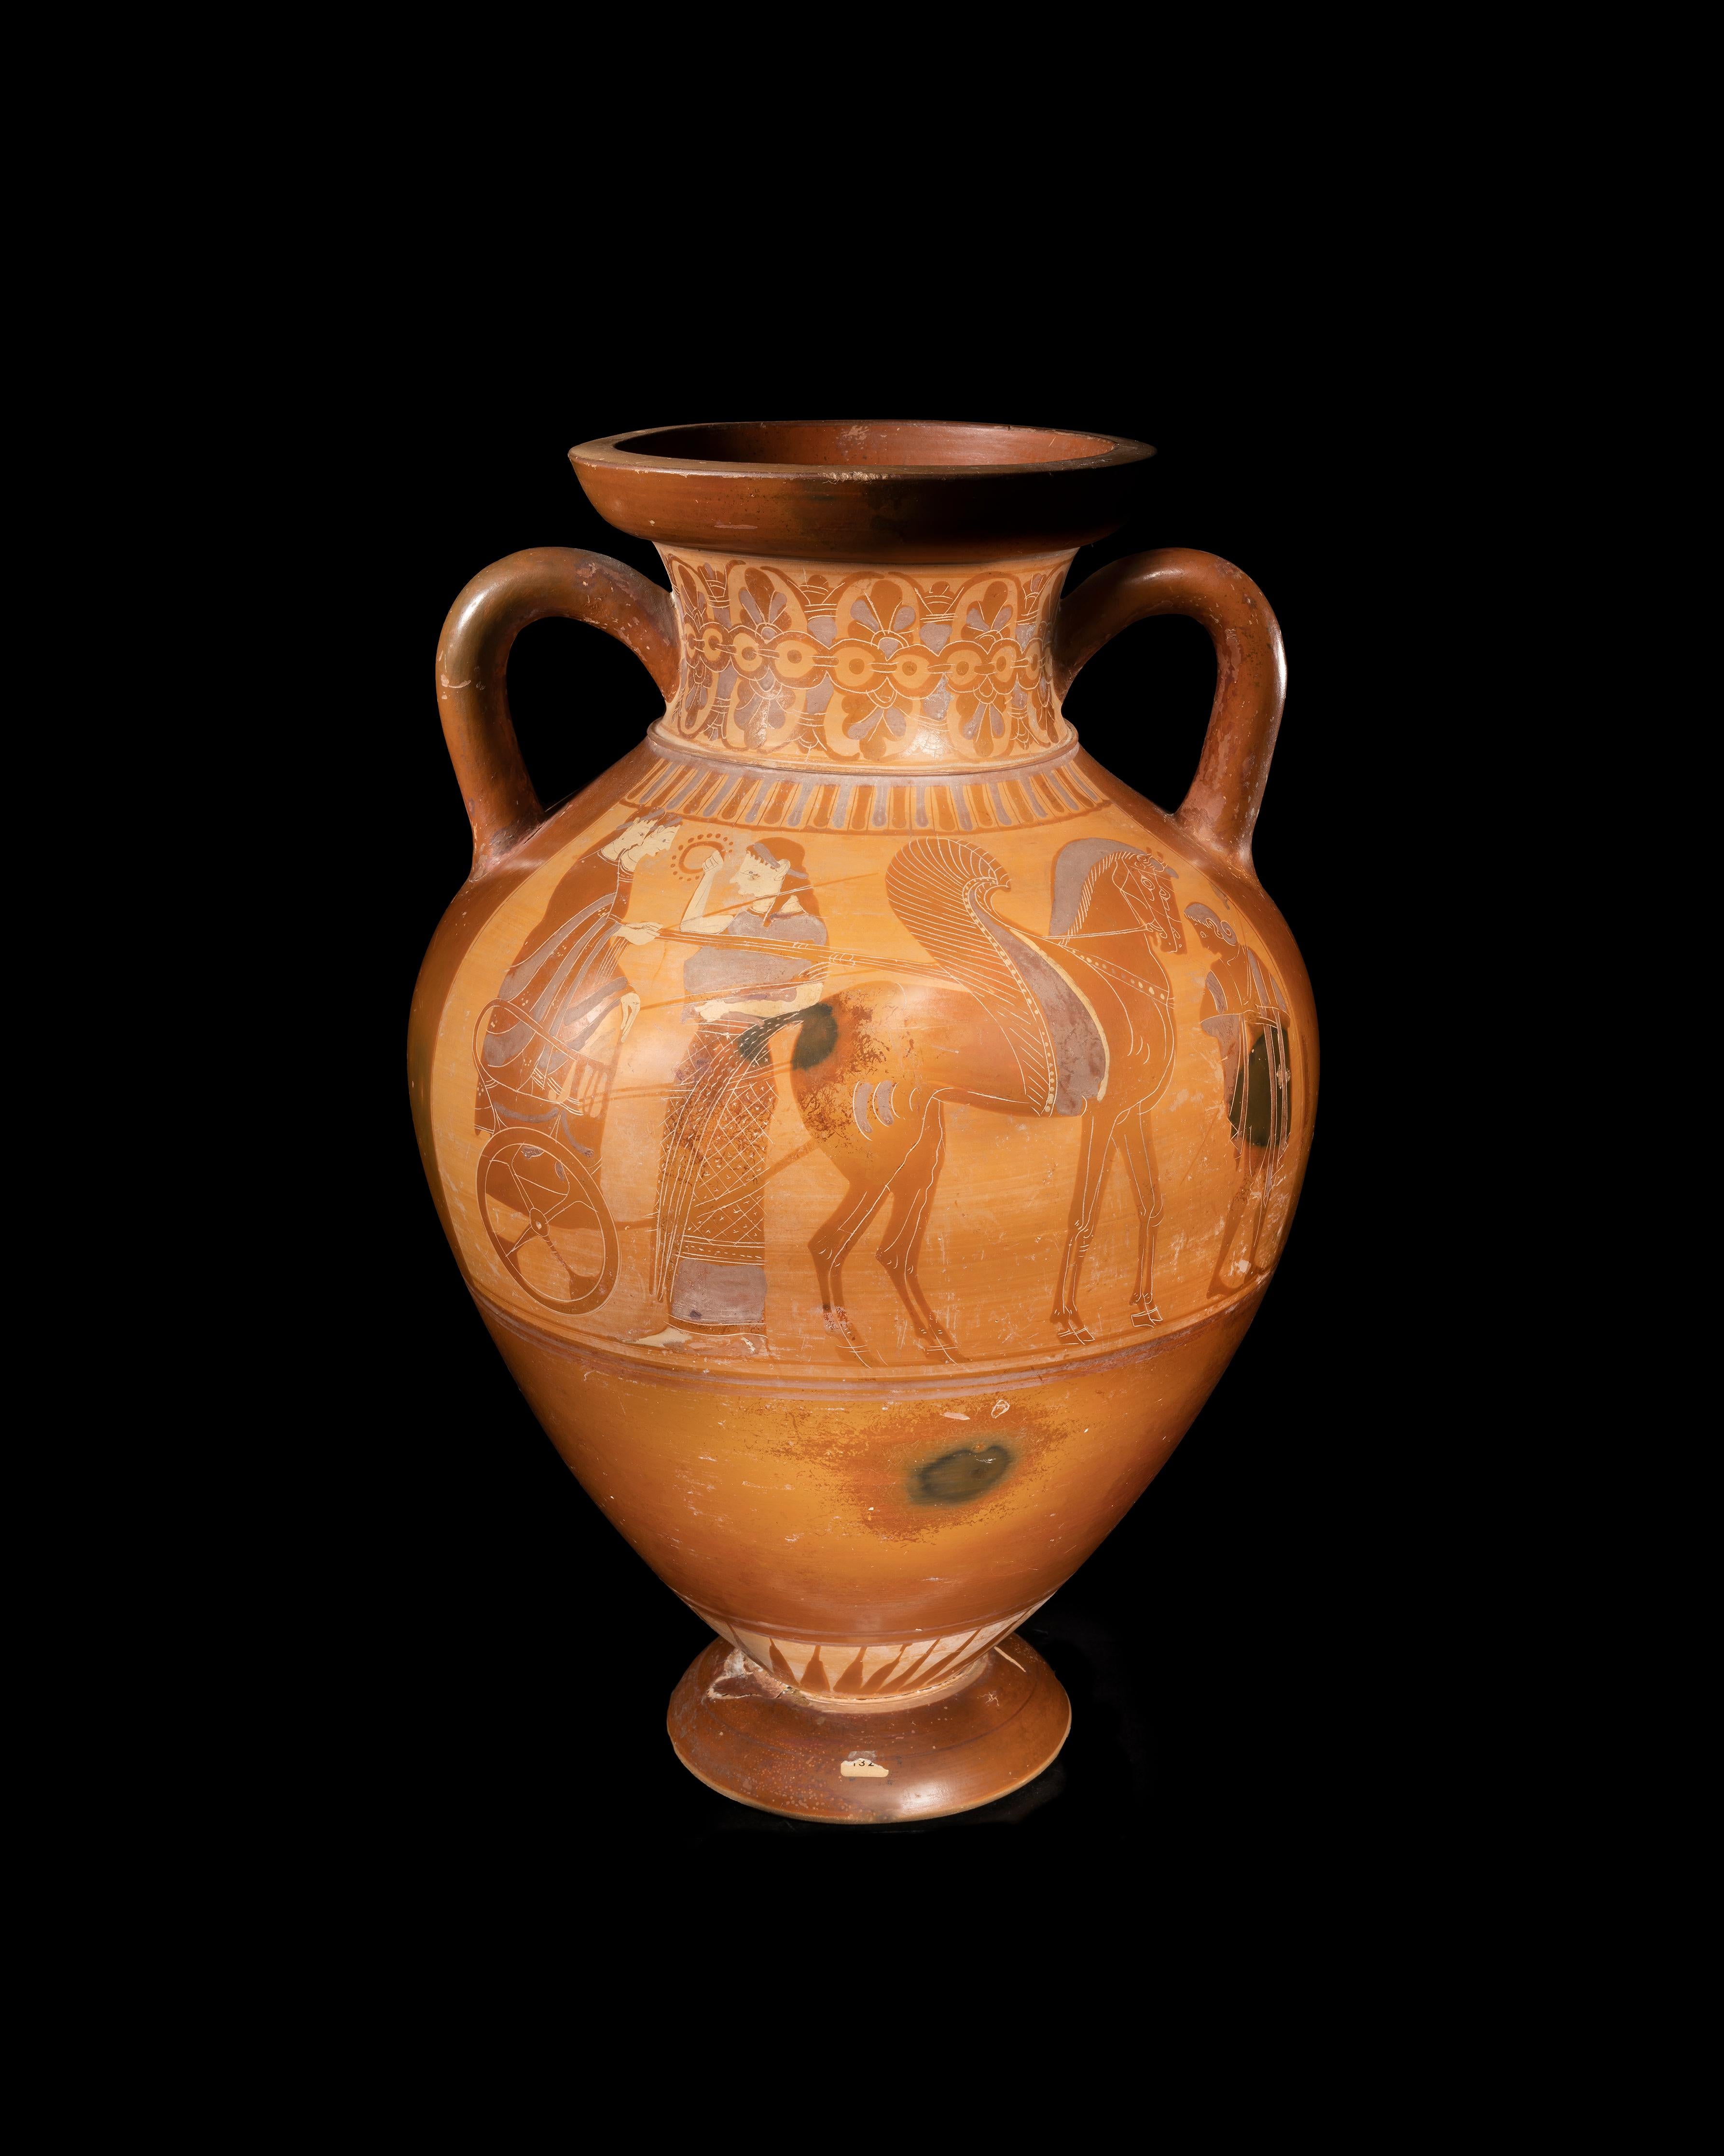 This fine Attic black-figure vase with a small foot, narrow neck and tight handles depicting on one side the fourth labour of Hercules, the capture of the wild Boar of Mount Erymanthus, showing the hero delivering the defeated boar to Eurystheus,